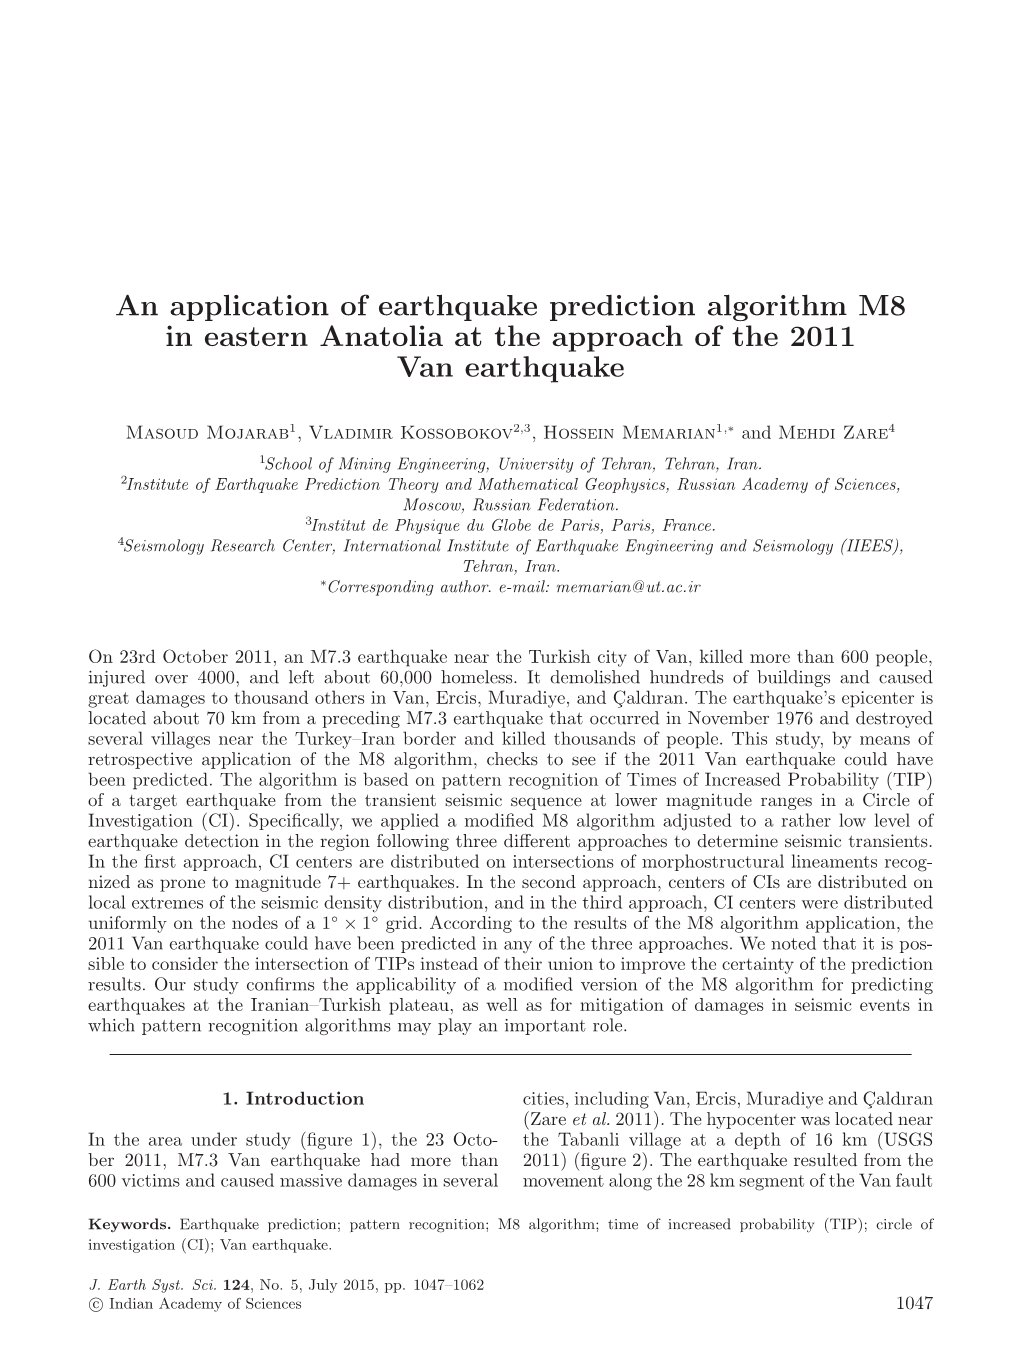 An Application of Earthquake Prediction Algorithm M8 in Eastern Anatolia at the Approach of the 2011 Van Earthquake